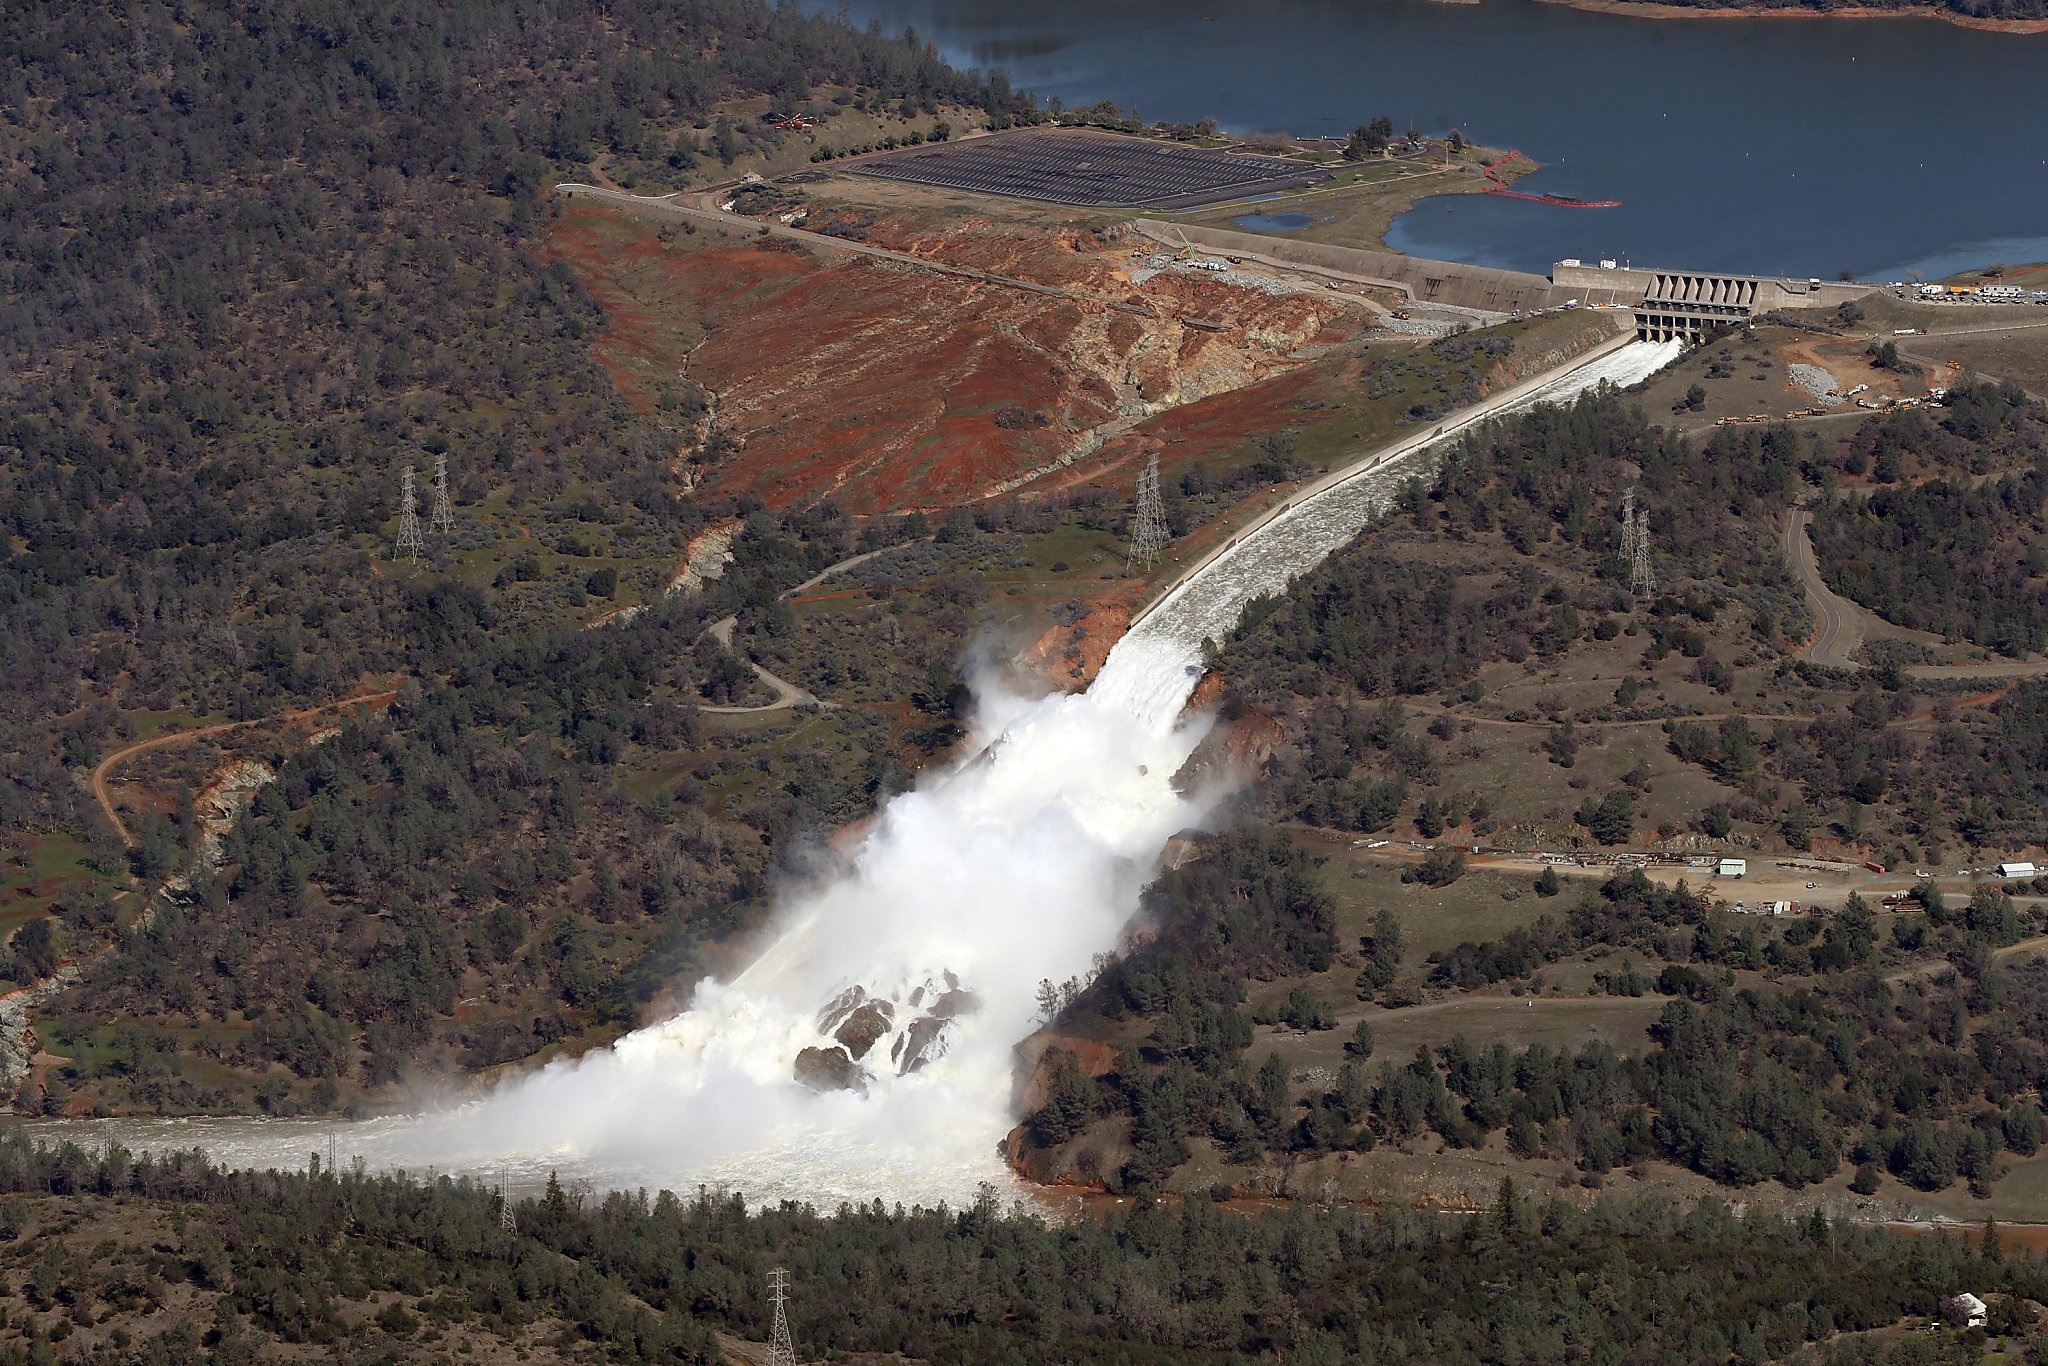 Even after Oroville neardisaster, California dams remain potentially